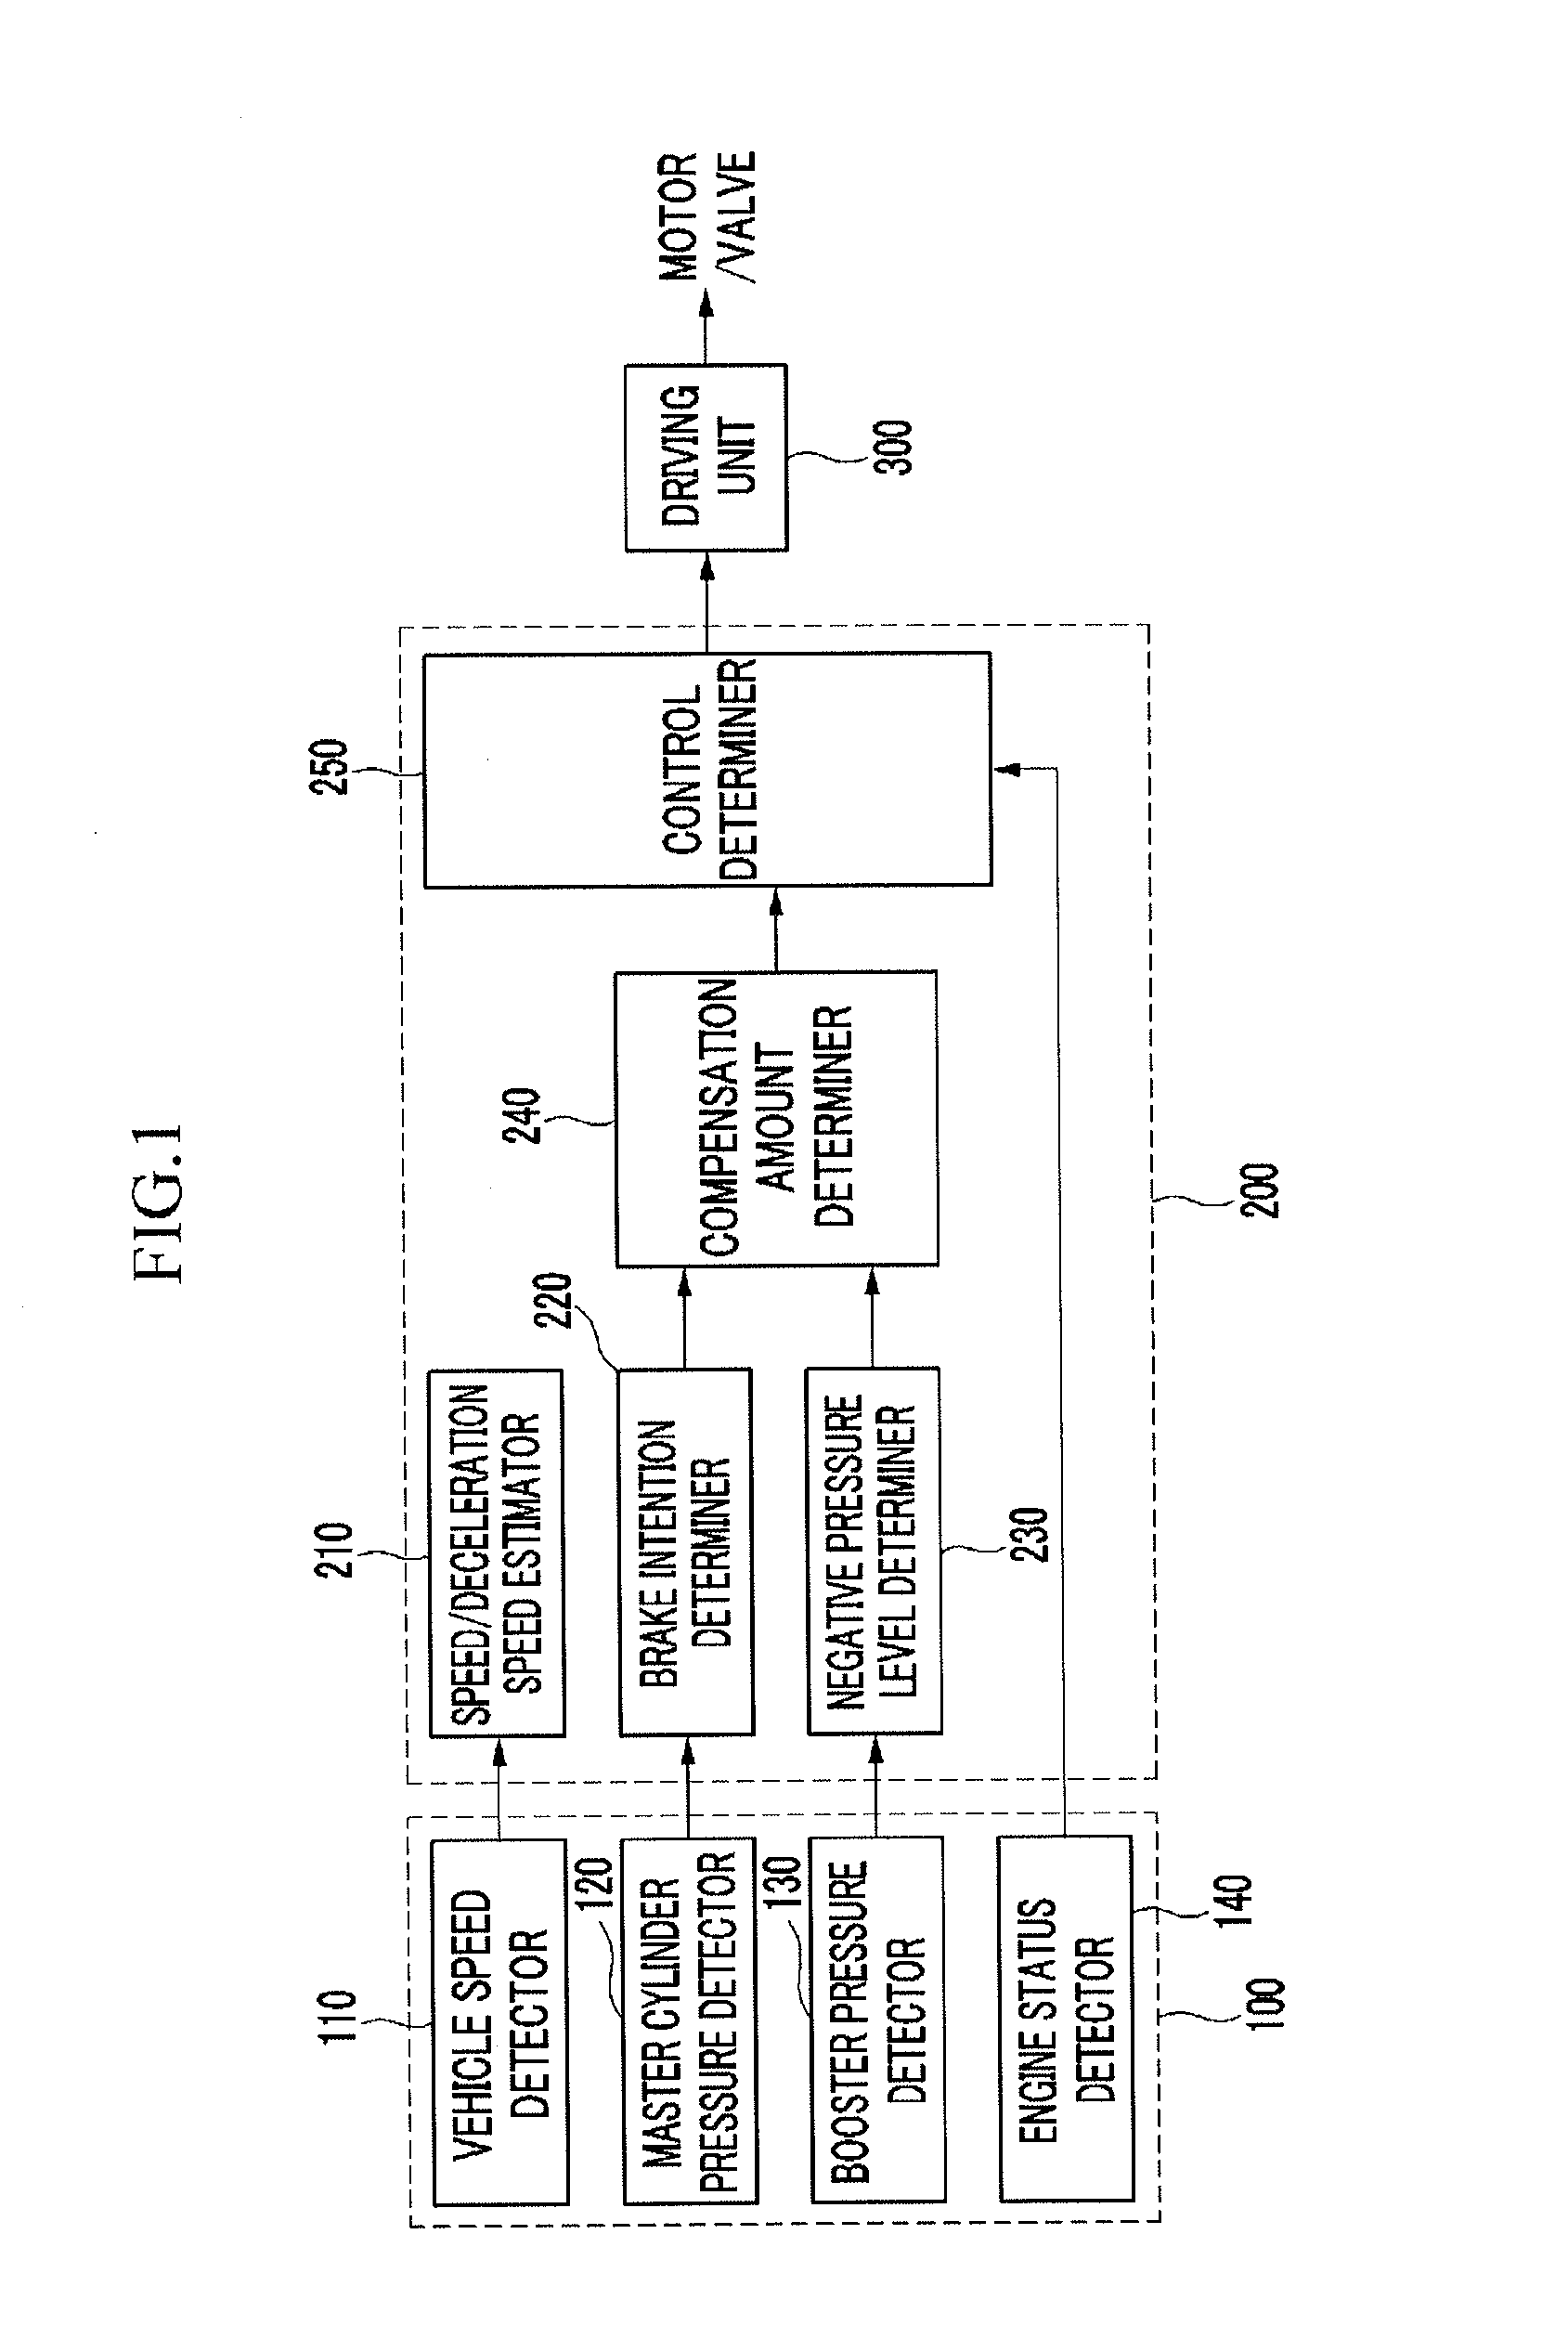 Brake pressure compensation system and method thereof